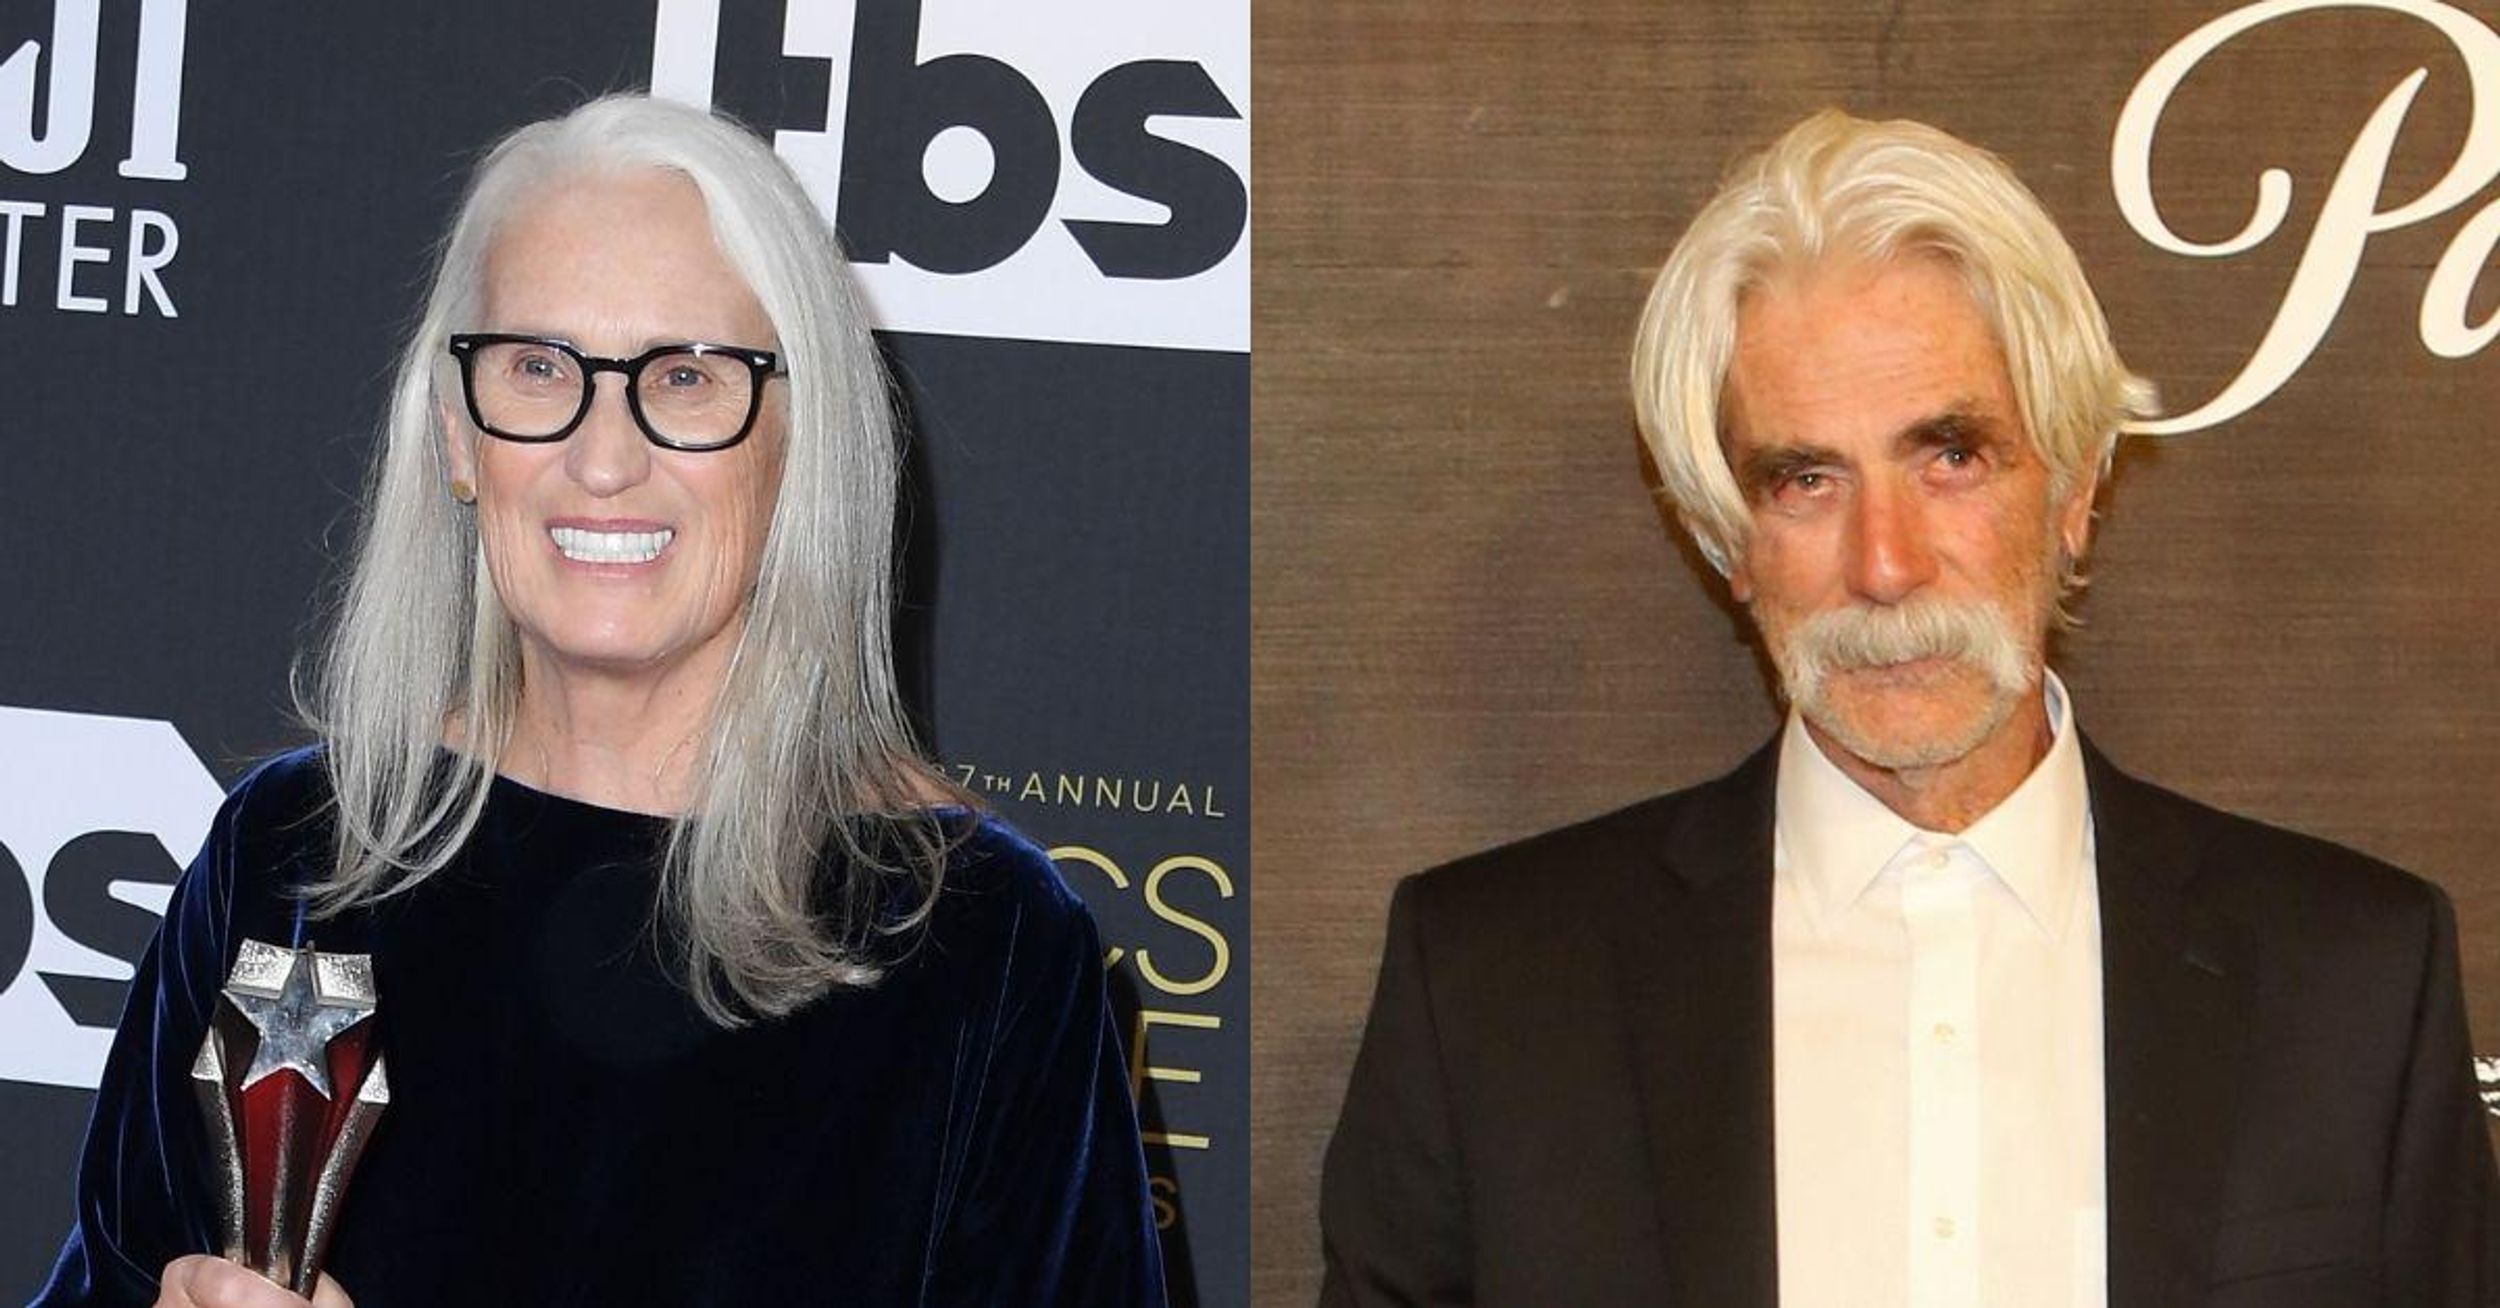 Jane Campion Rips 'Sexist' Sam Elliott In Blistering Response To His 'Power Of The Dog' Rant